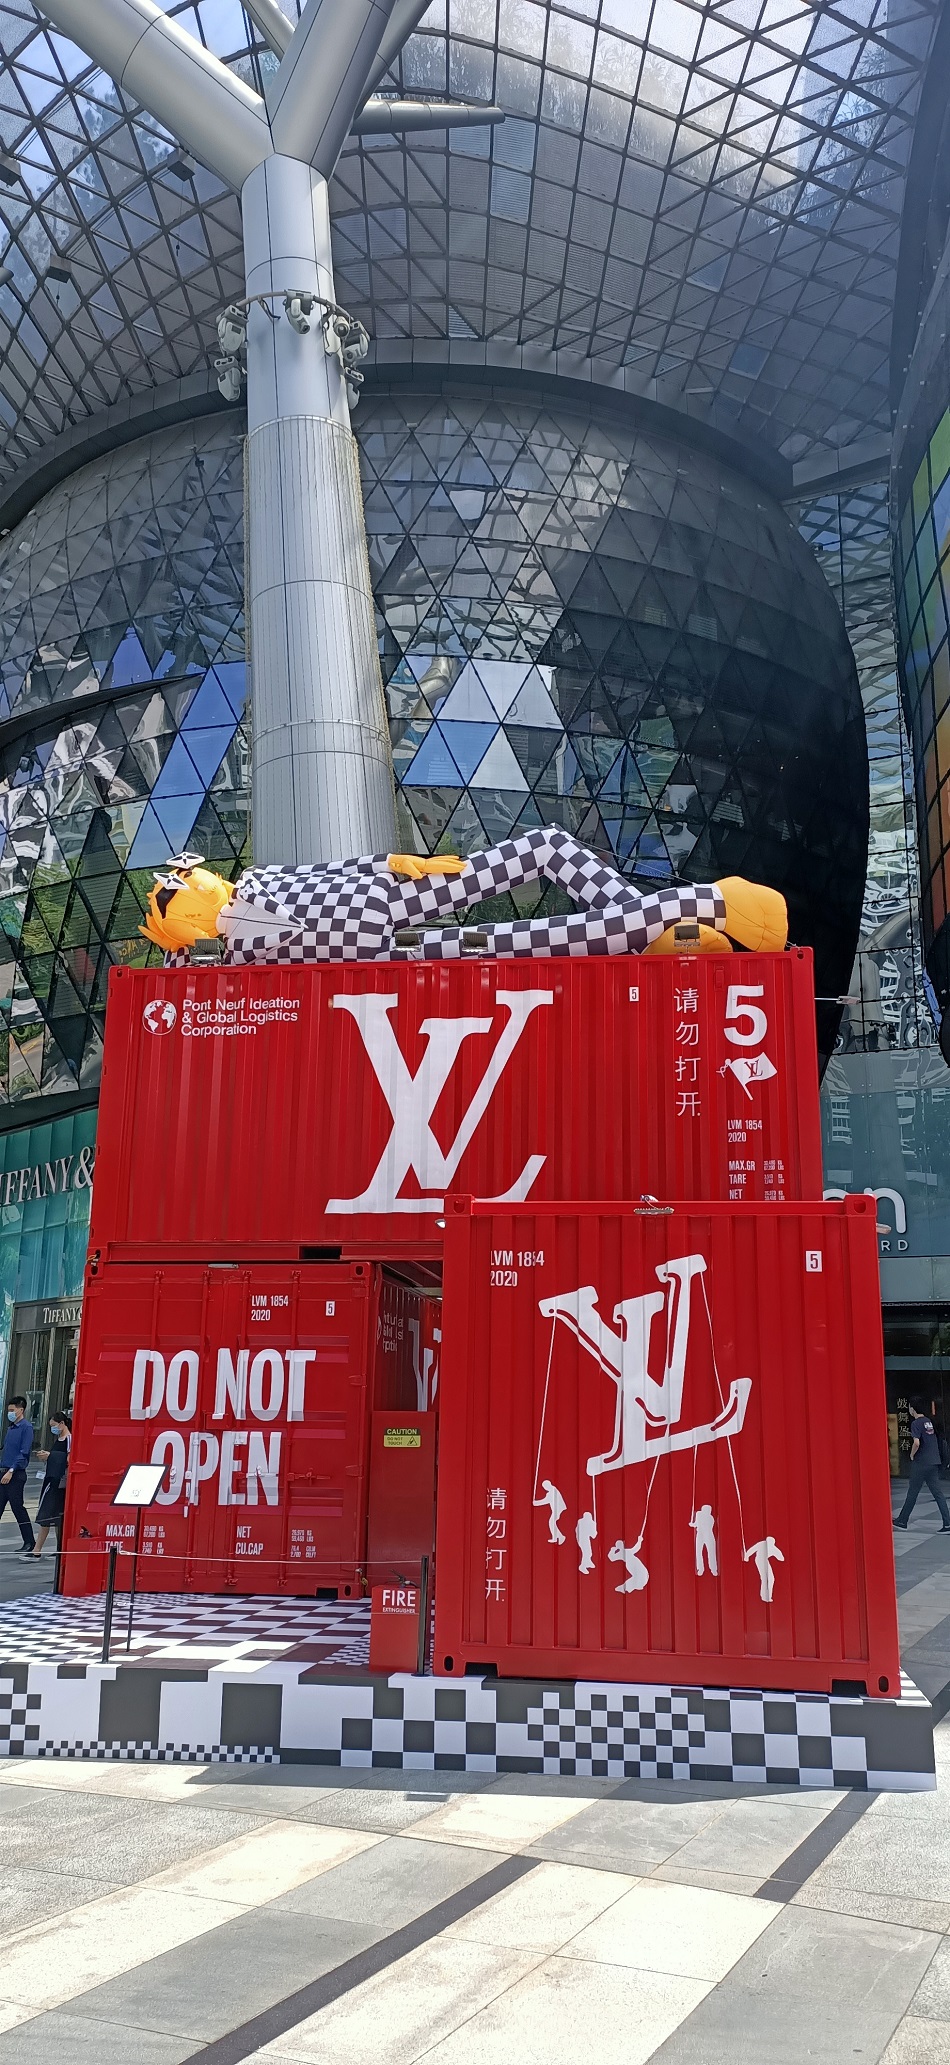 Shipping Containers Meet Fashion With Louis Vuitton Seatrade Maritime